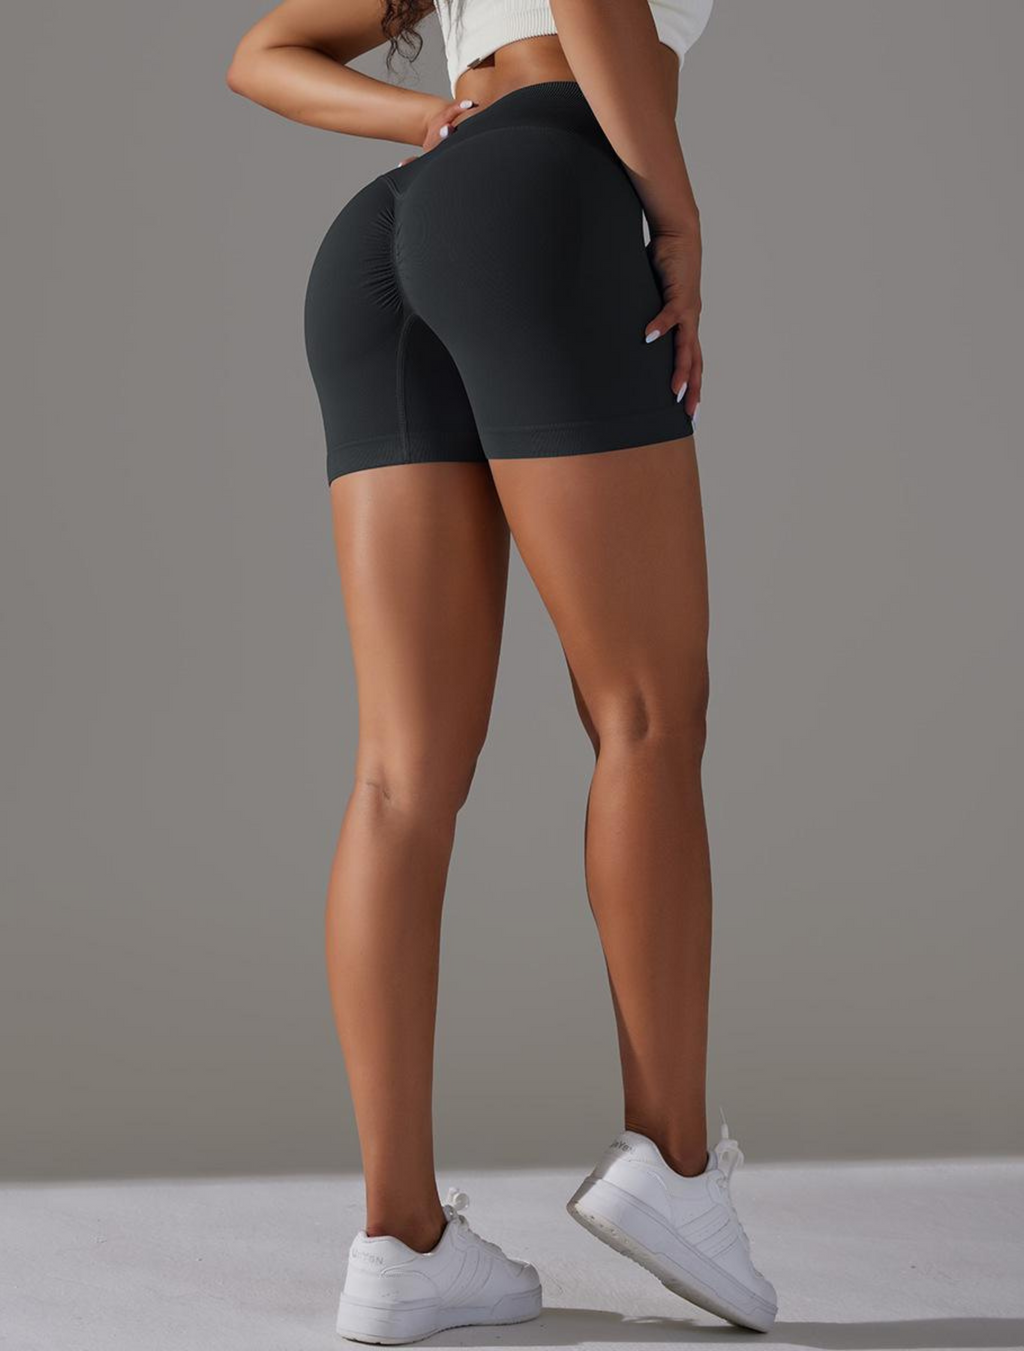 Miss Bey Booty Shorts